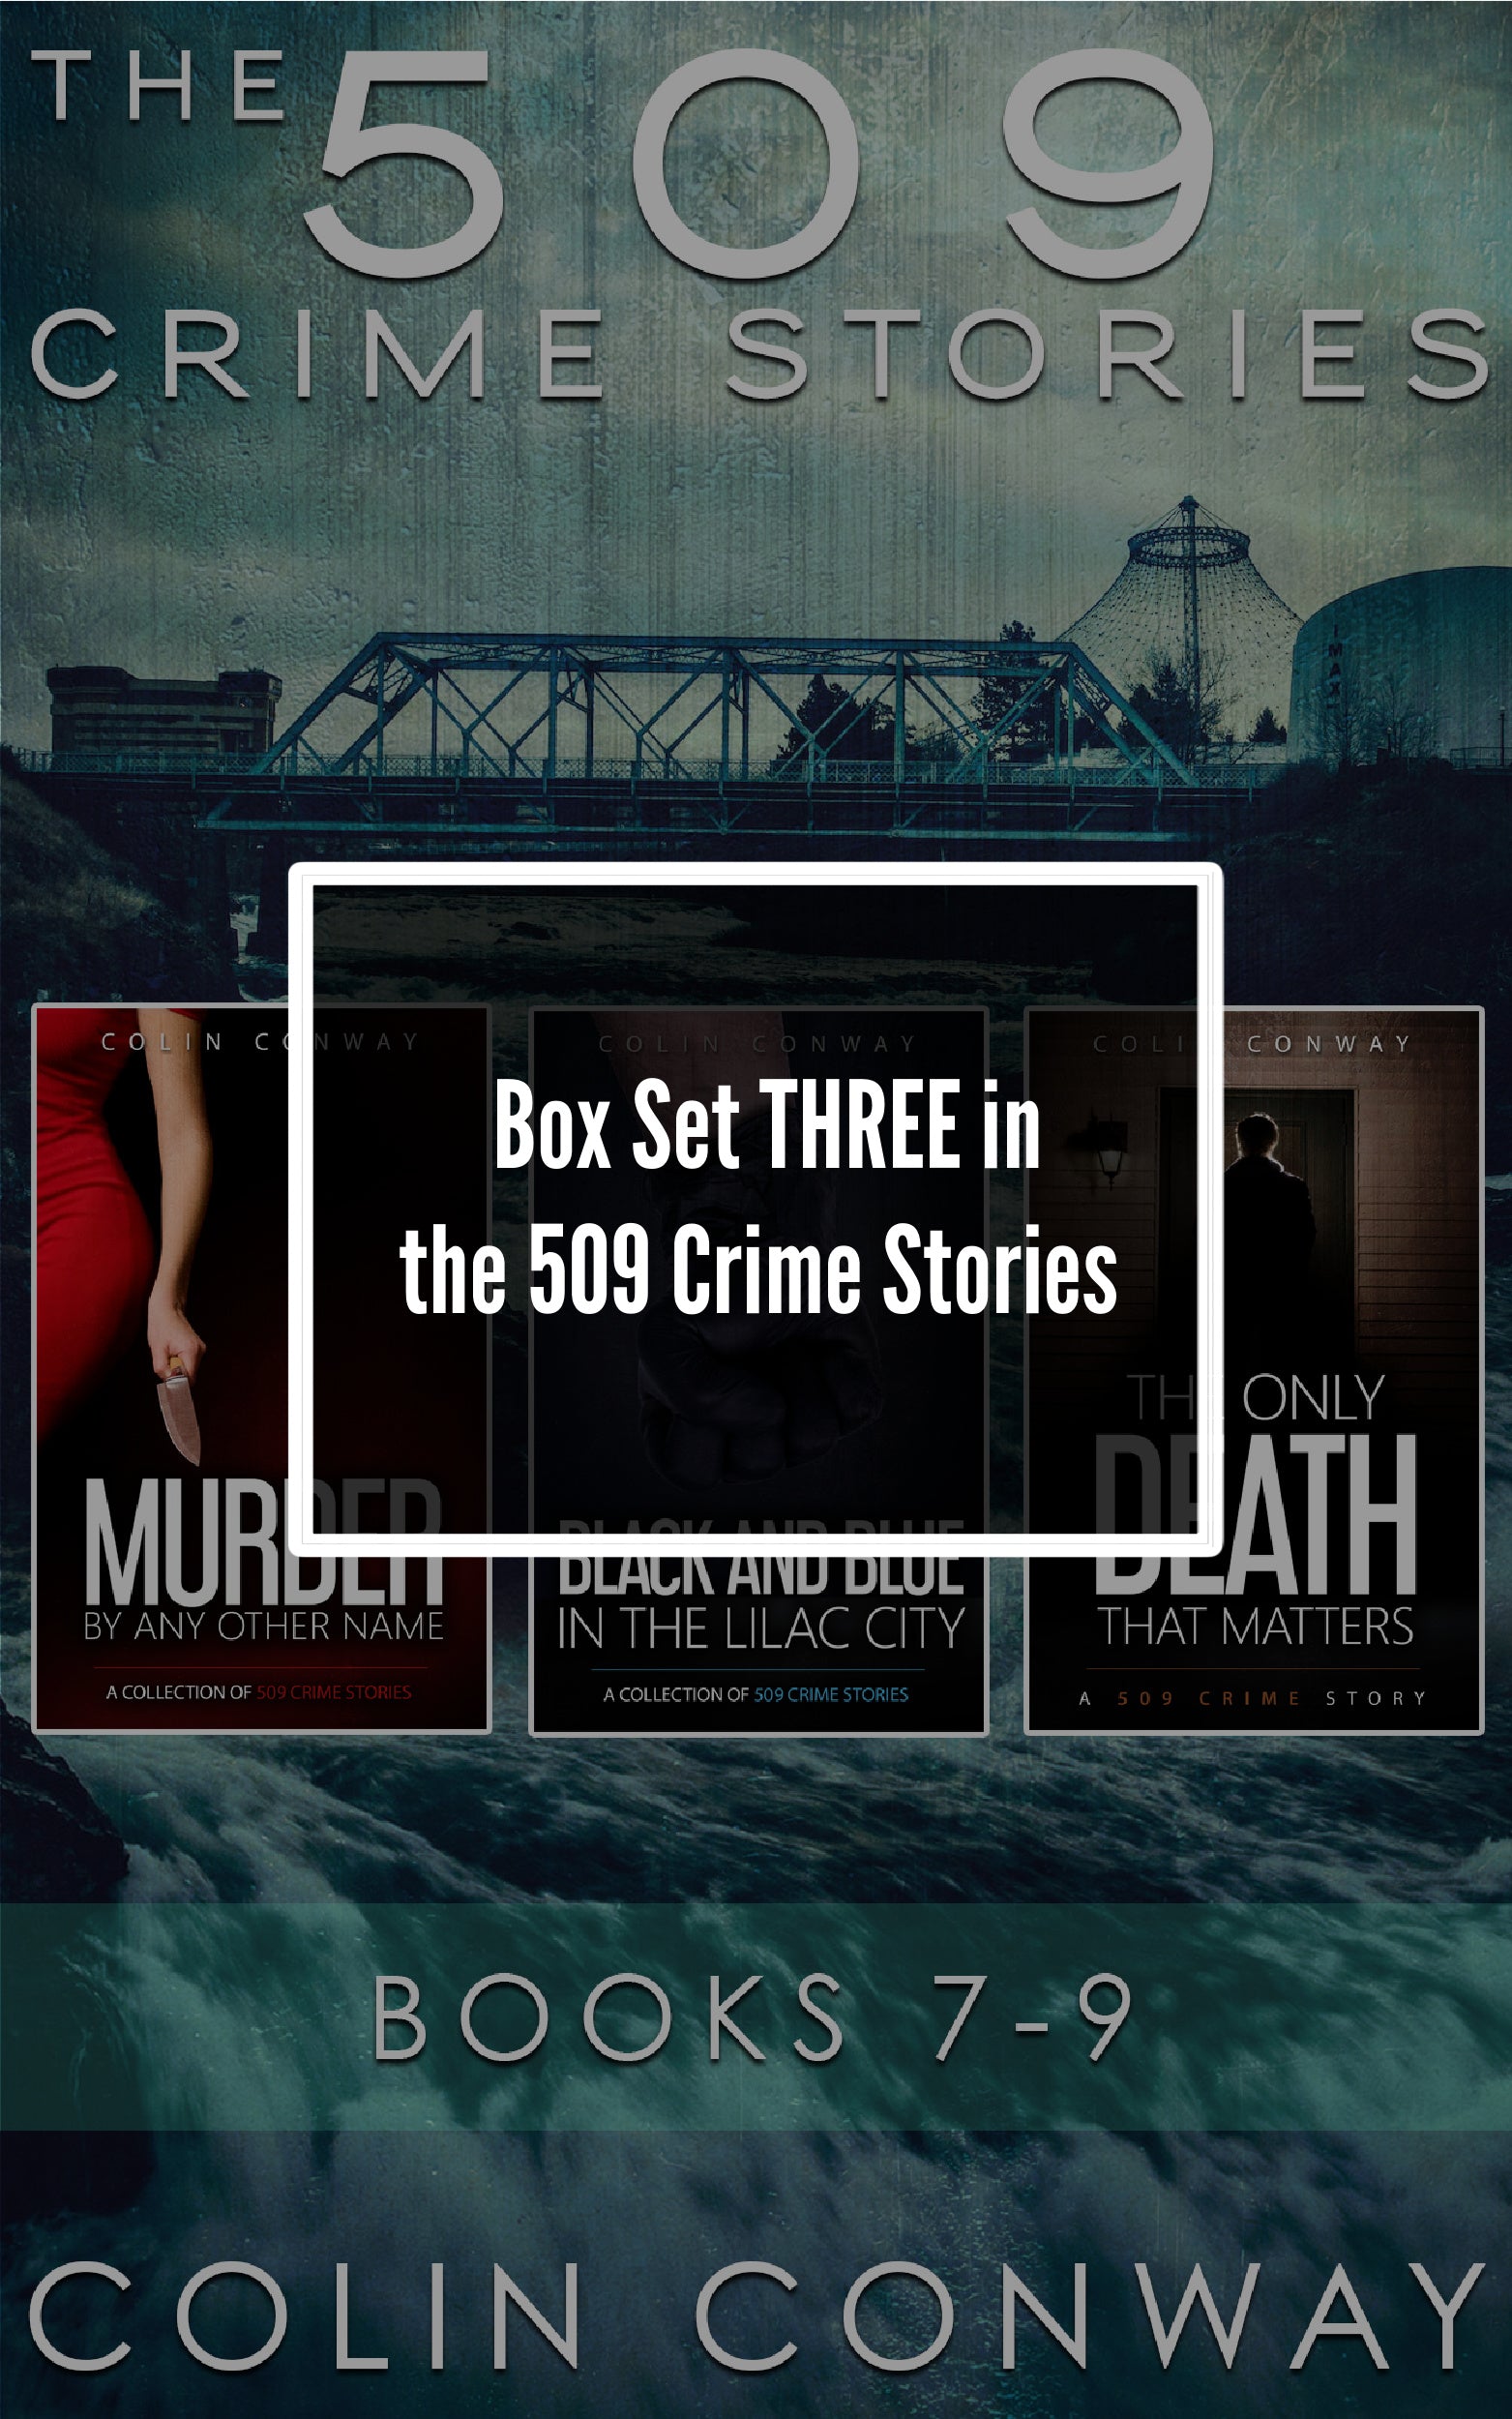 The 509 Crime Stories are intense crime fiction novels by Colin Conway. Imagine if NYPD BLUE occurred in the Pacific Northwest, and you’ll have a good idea of what this series is about.